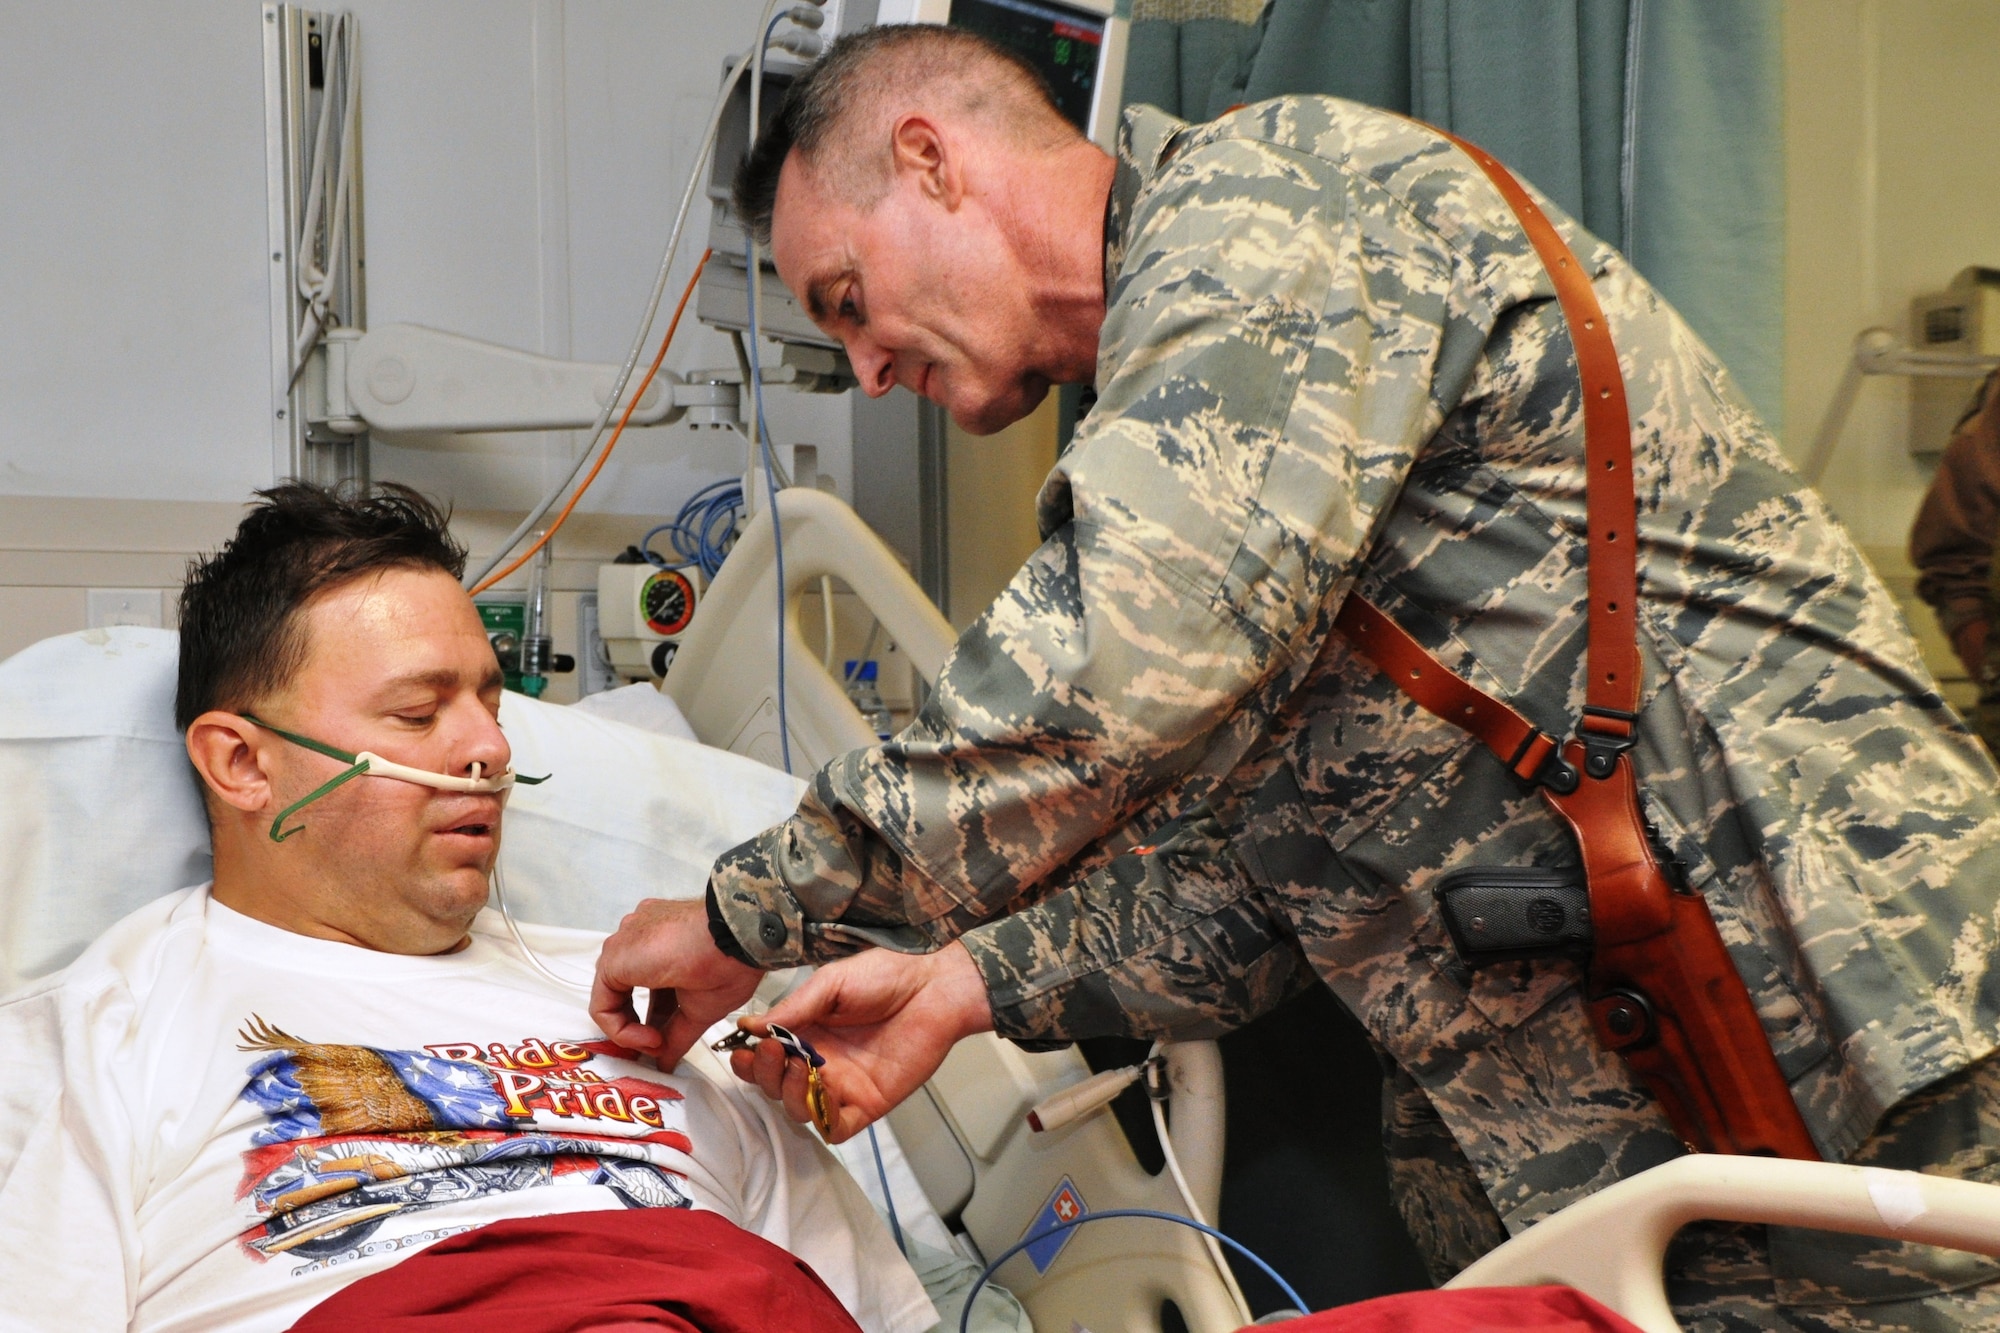 Brig. Gen. Darryl Roberson, 455th Air Expeditionary Wing commander, pins a Purple Heart Medal on Tech. Sgt. James Davis, 83rd Expeditionary Rescue Squadron, at the Craig Joint Theater Hospital, April 23, 2011.  Sergeant Davis was shot in the leg during a mission to recover the pilots of a downed Army helicopter.  (U.S. Air Force photo by Capt. Erick Saks)